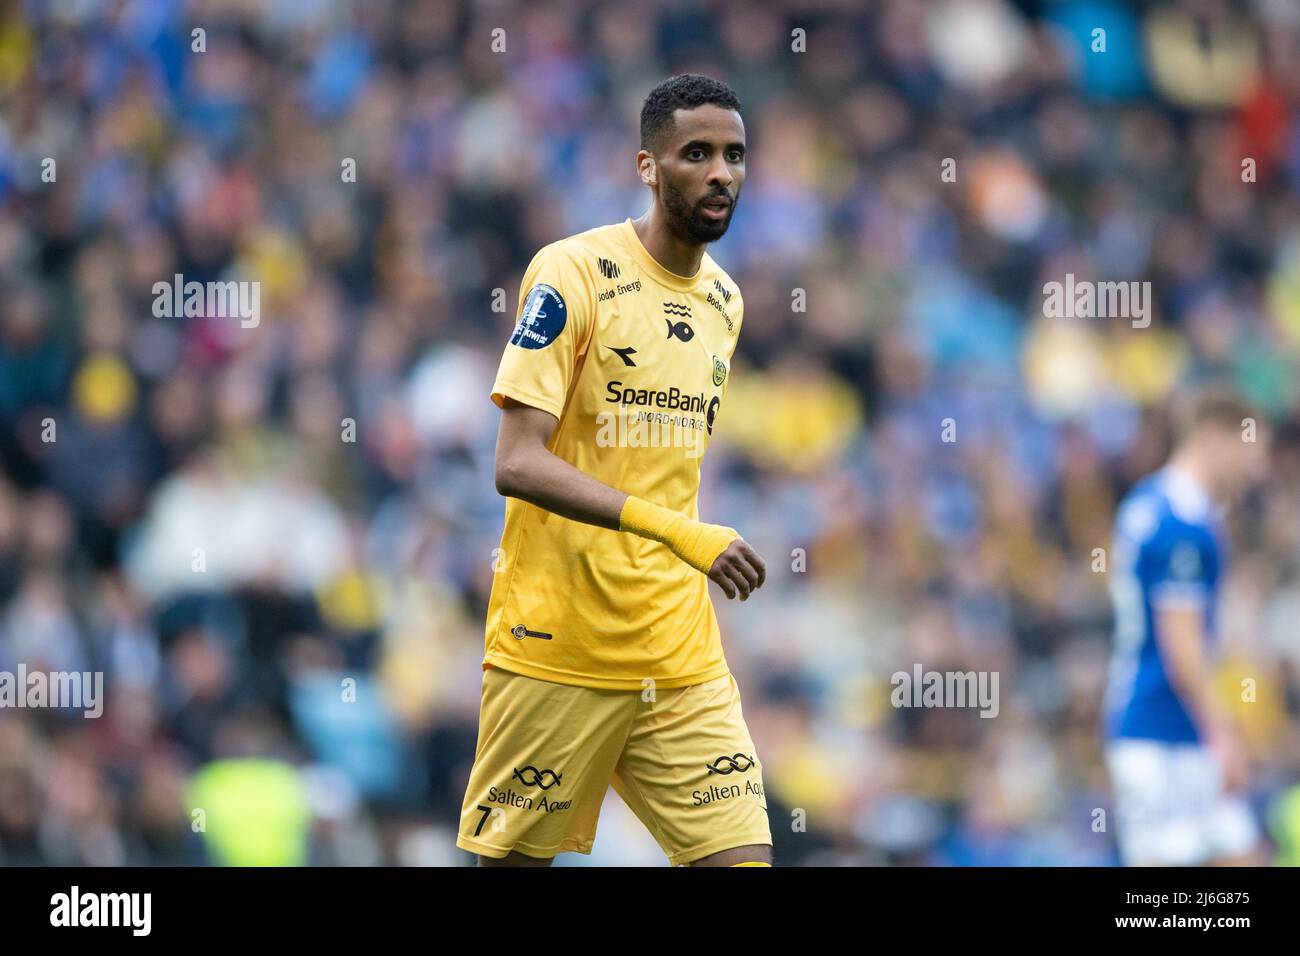 Oslo, Norway. 01st, May 2022. Amahl Pellegrino (7) of Bodoe/Glimt seen in the Norwegian Cup final, the NM Menn final, between Bodoe/Glimt and Molde at Ullevaal Stadion in Oslo. (Photo credit: Gonzales Photo - Jan-Erik Eriksen). Credit: Gonzales Photo/Alamy Live News Stock Photo